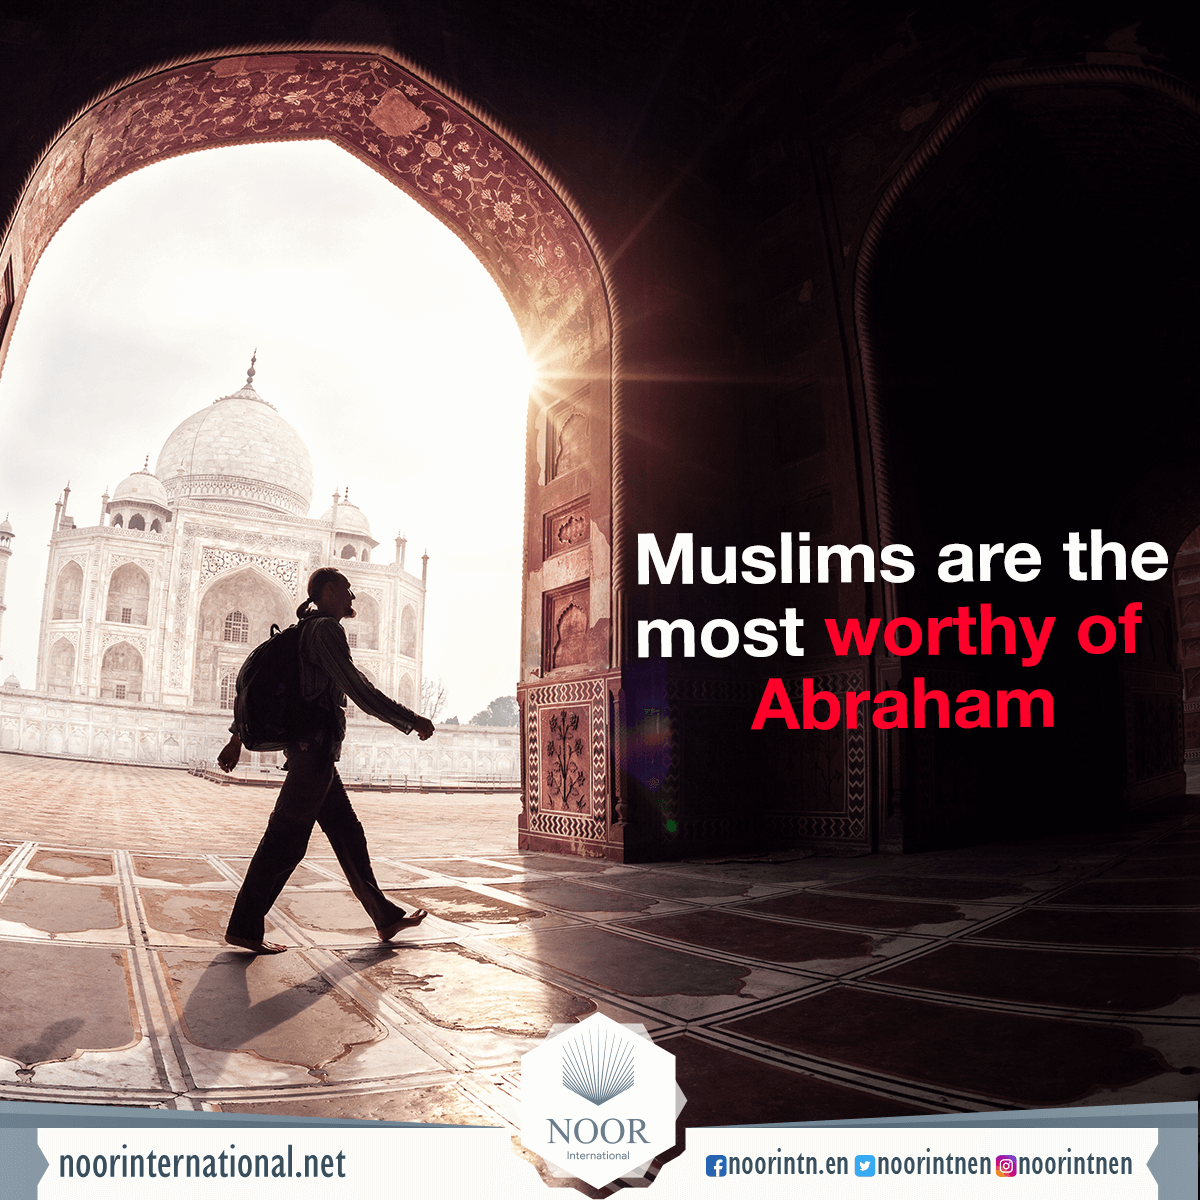 Muslims are the most worthy of Abraham